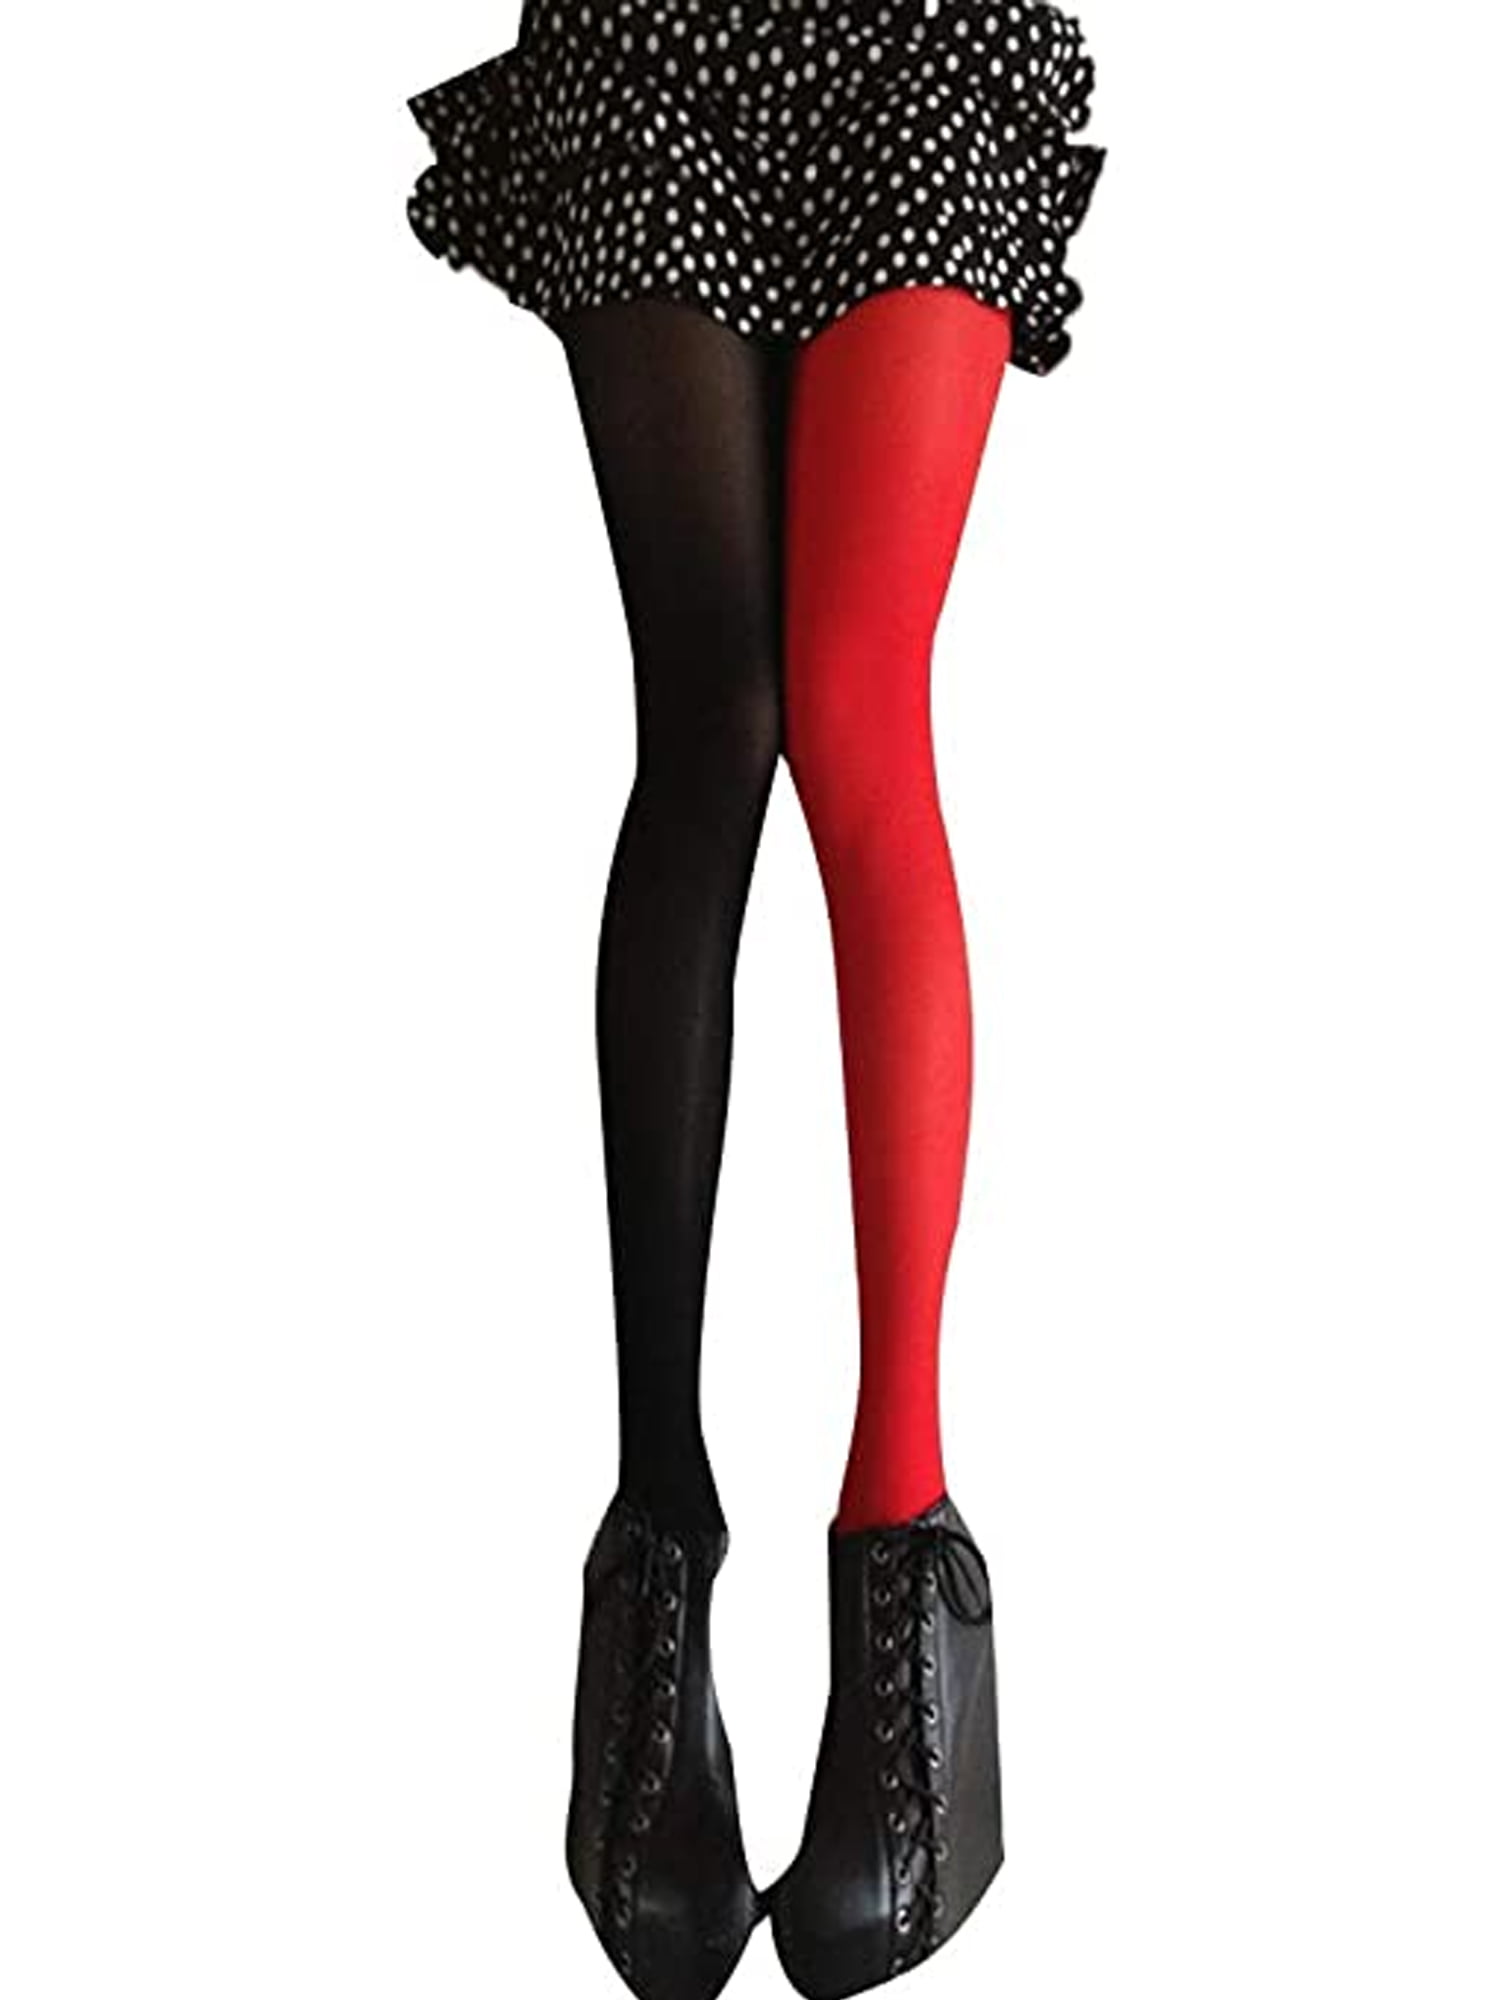 MERSARIPHY Women Patchwork Footed Tights Stretchy Pantyhose Stockings ...